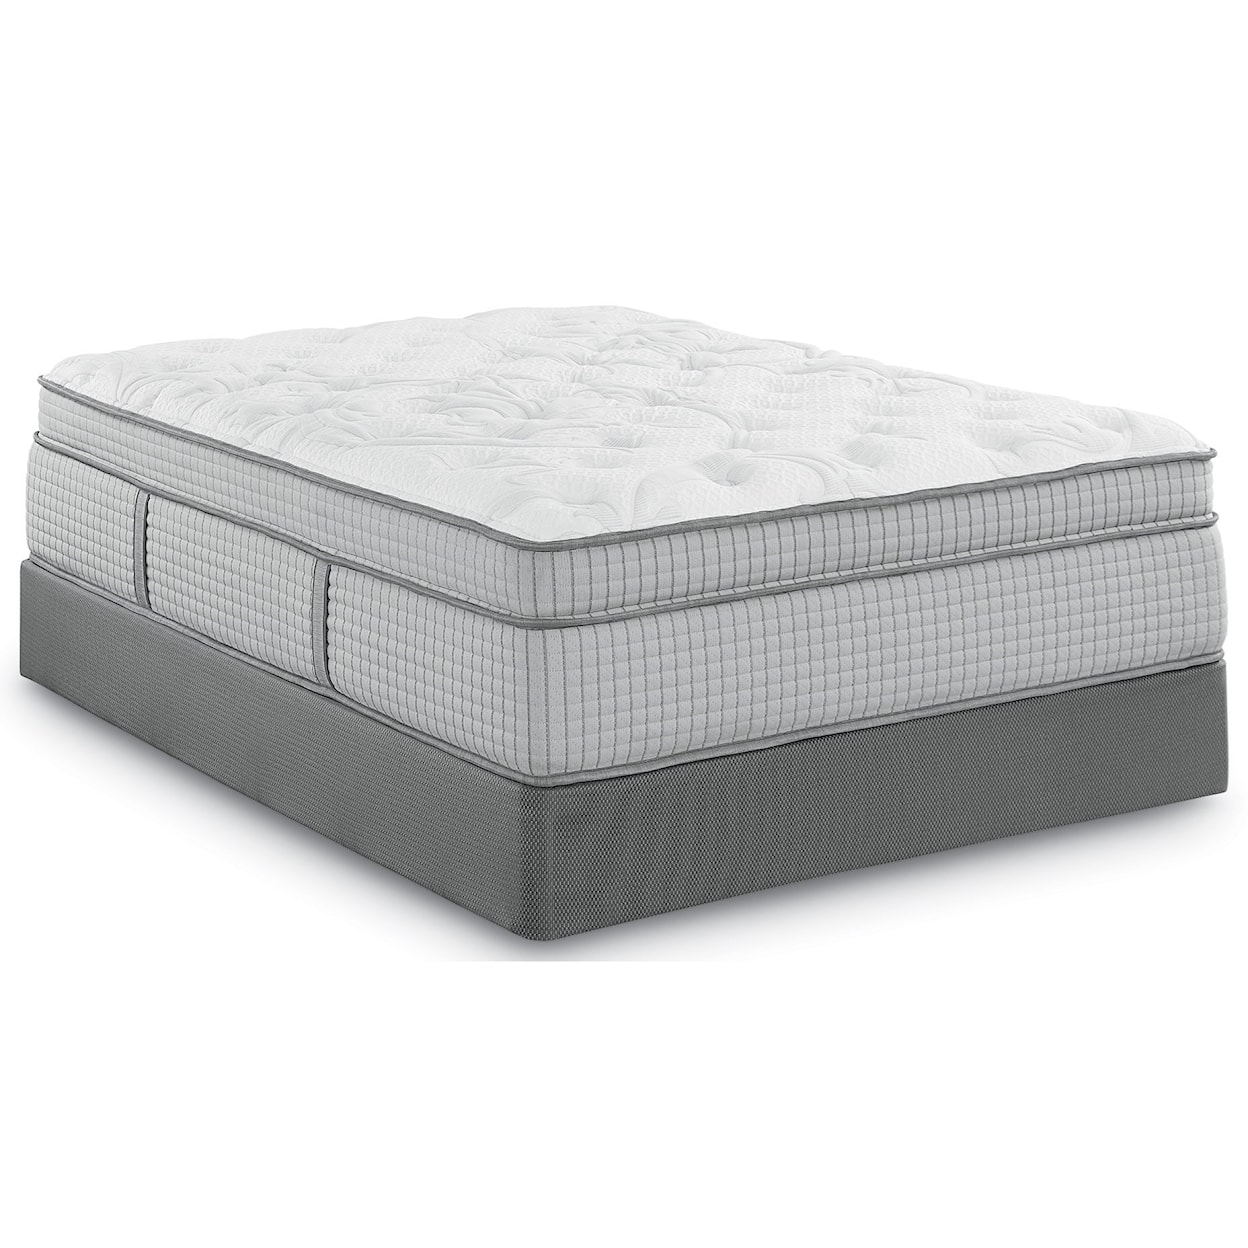 Restonic Biltmore House Euro Top Twin Euro Top Coil on Coil Mattress Set